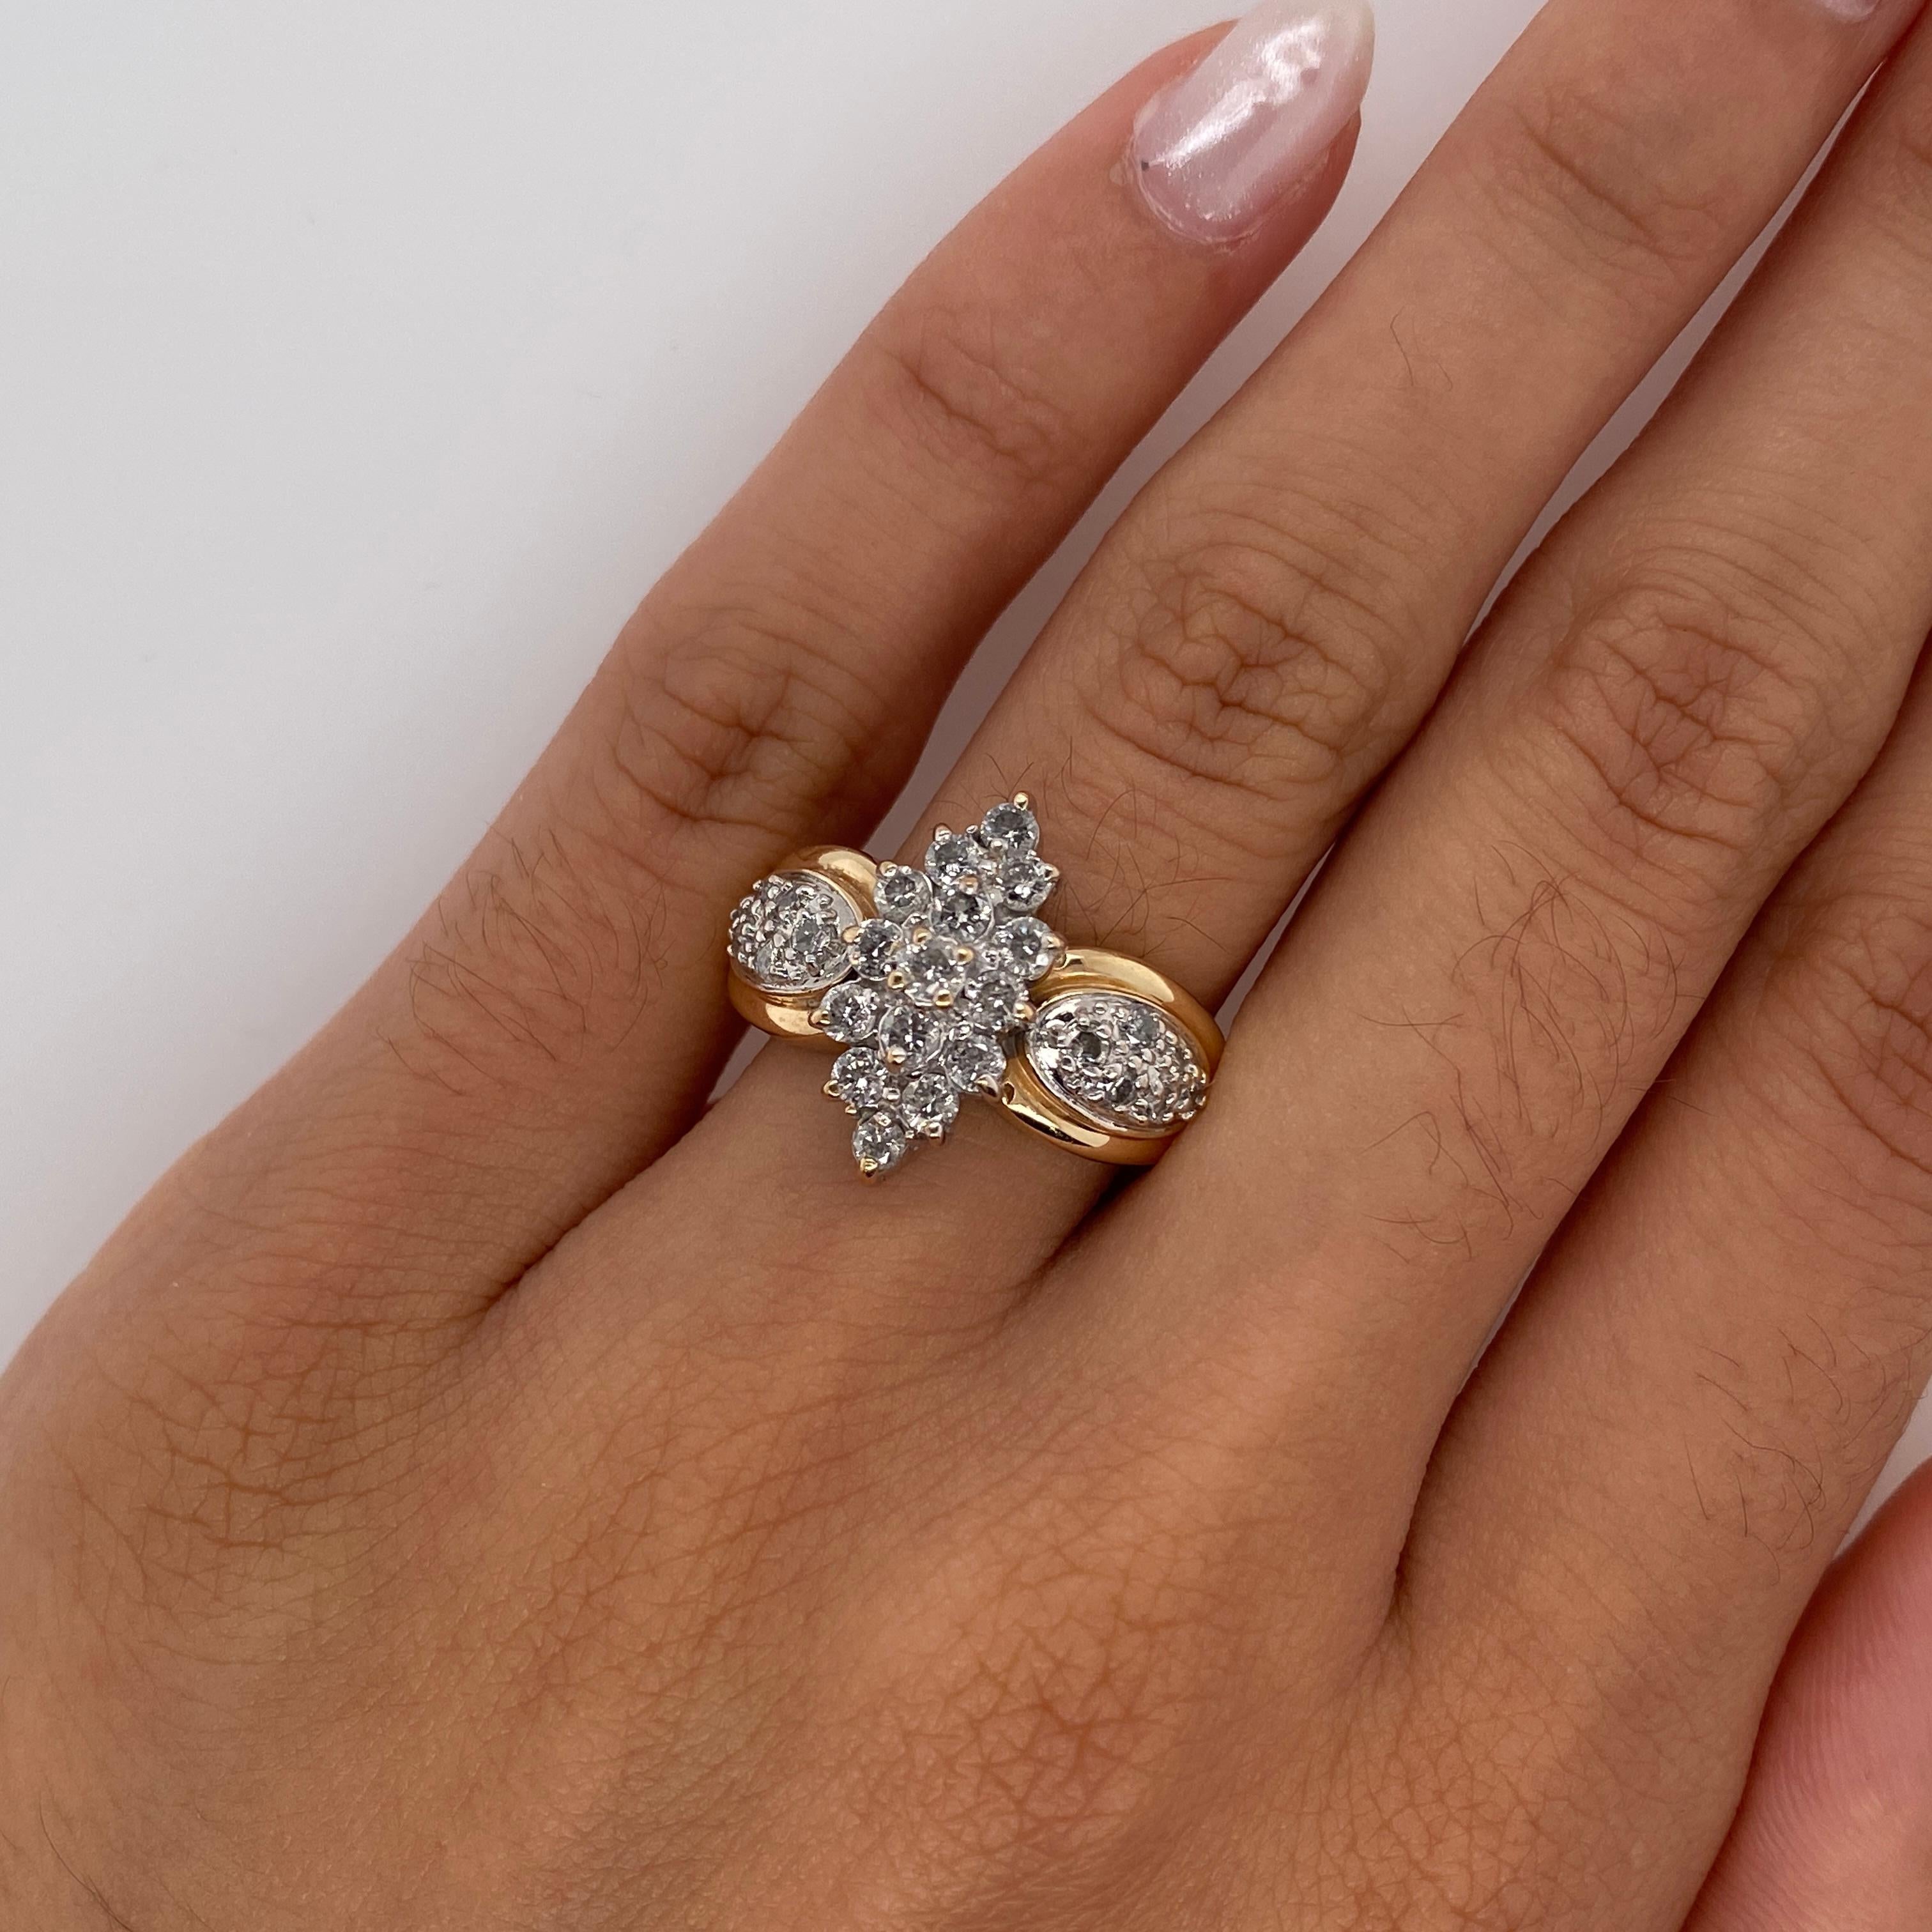 This is a vintage diamond cluster charmer! The center diamonds form a tall ship made of sparkles, and the side diamonds form oval pools to accent the center. The navette center of the ring is made in 14 karat white gold, while the ring band is made